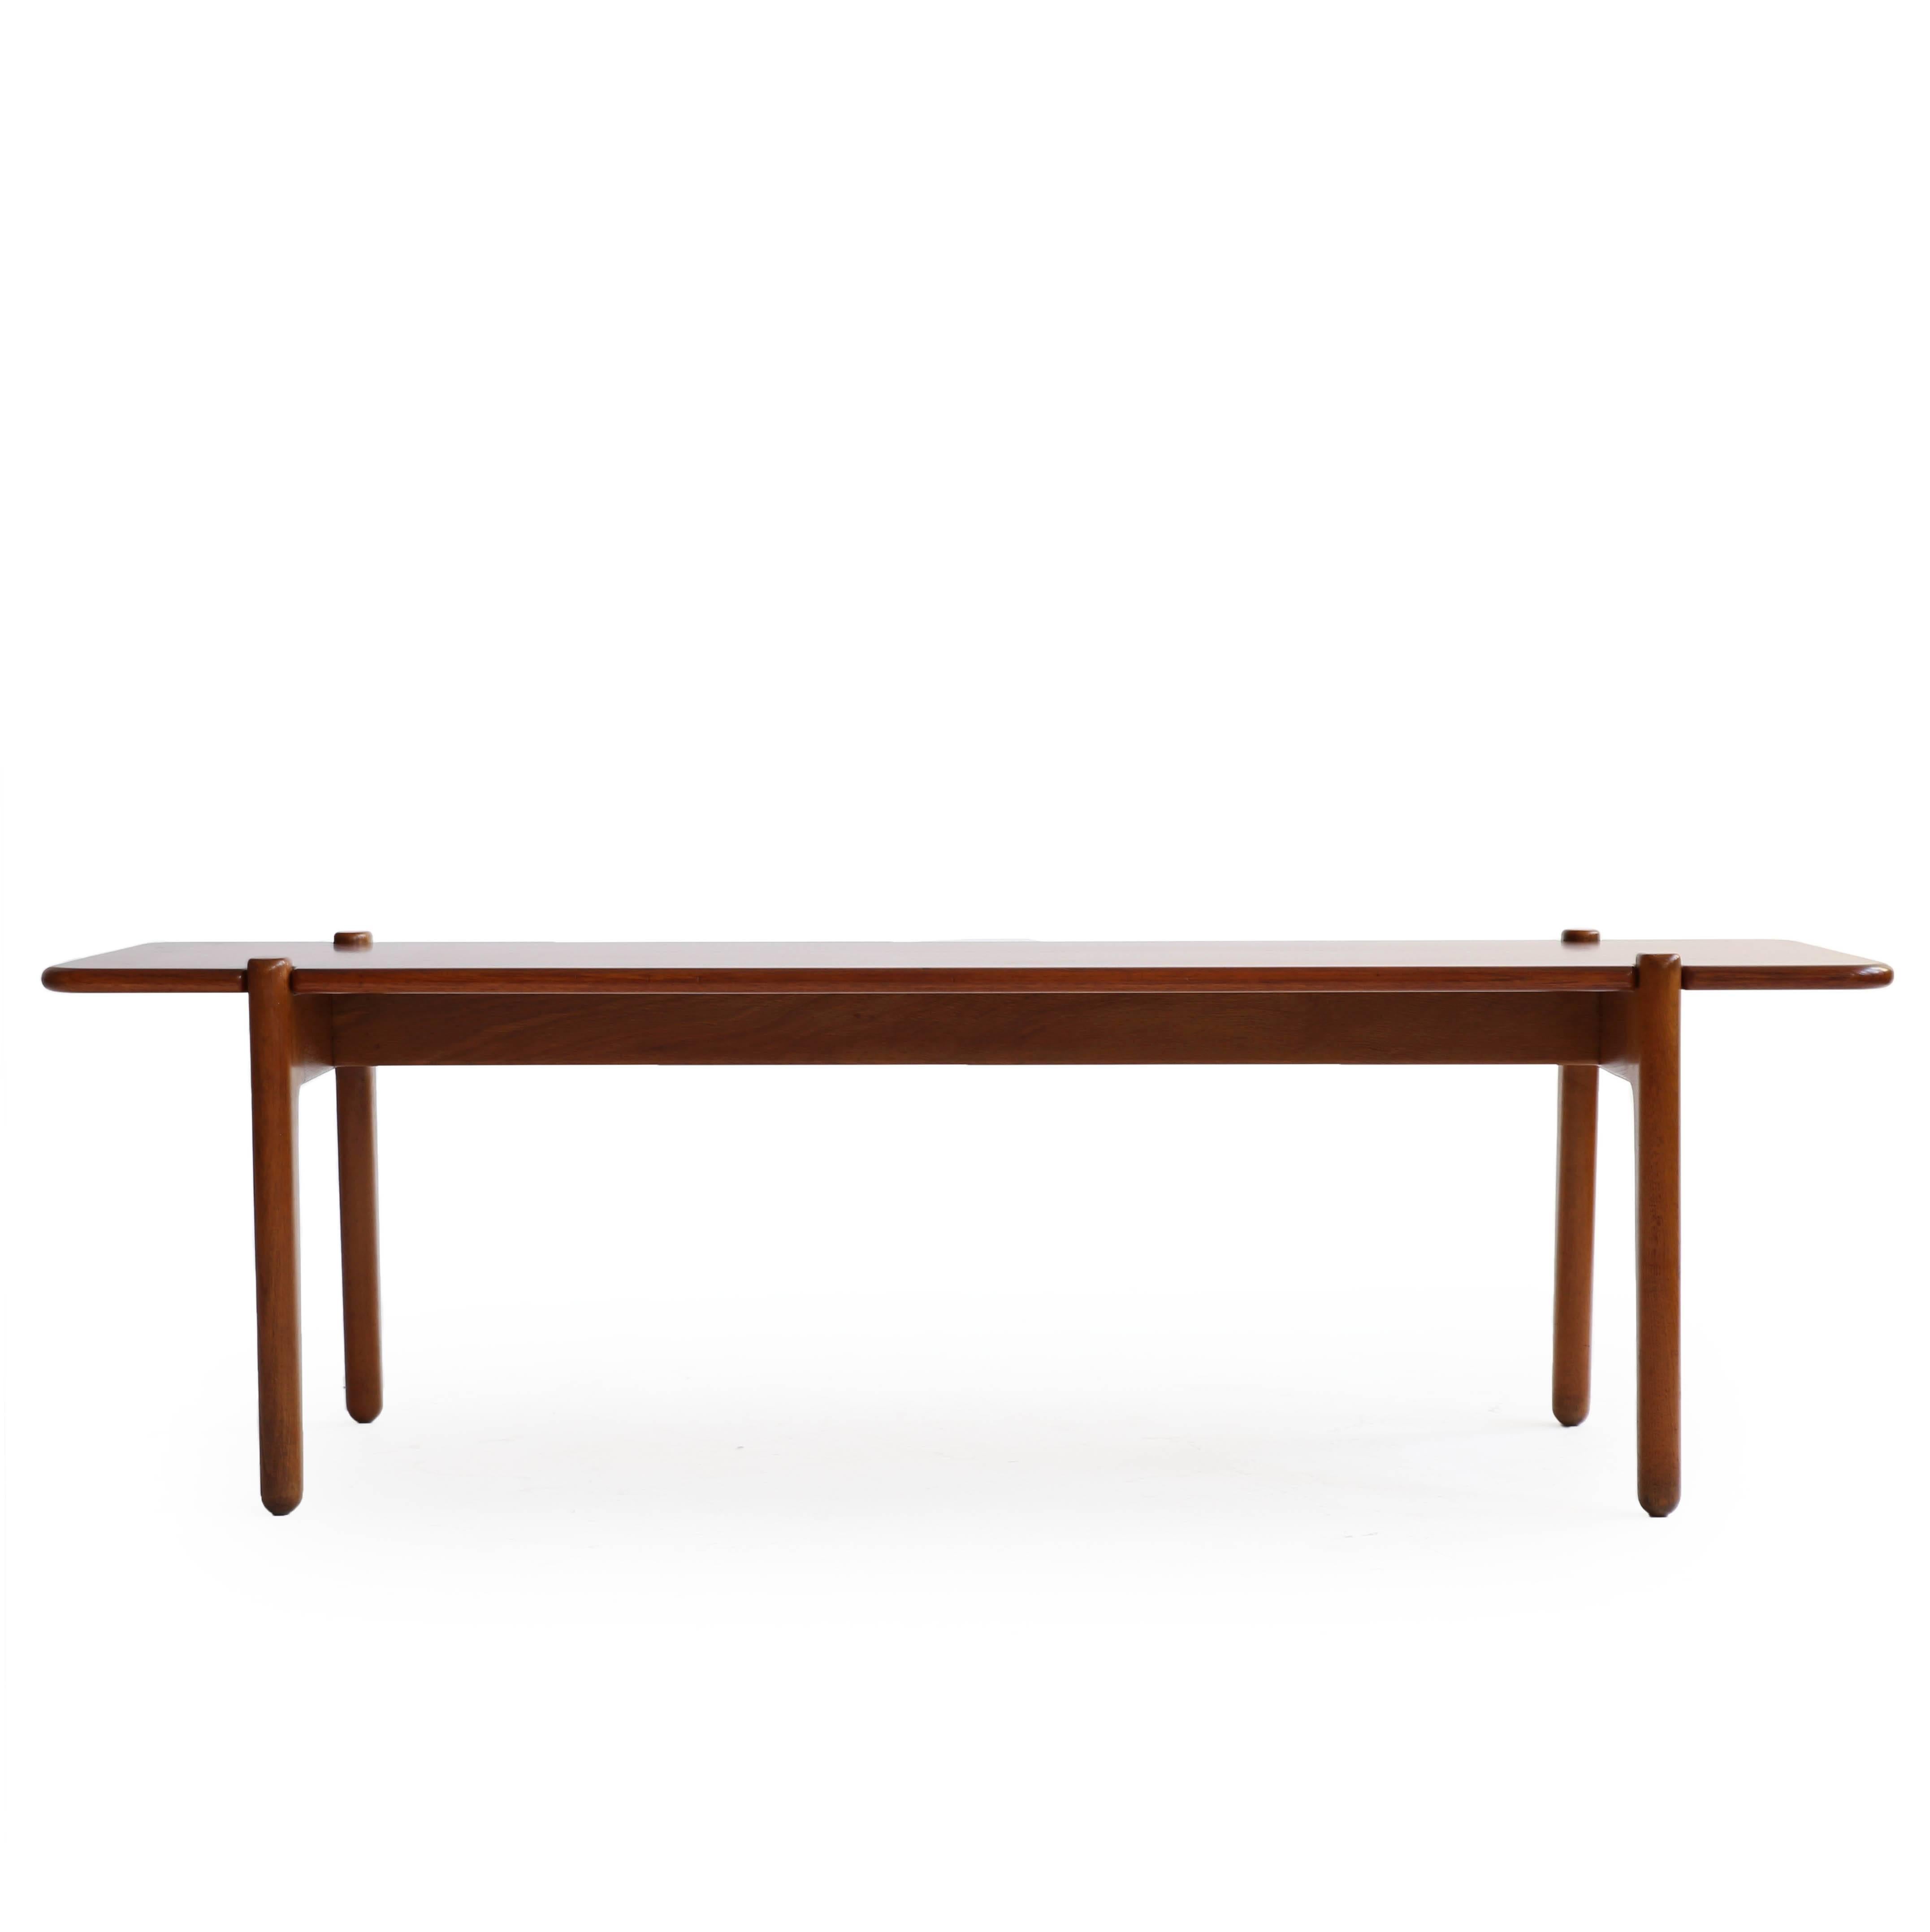 Beautiful minimalistic bench or coffee table with original patinated oak frame and reversible top of solid teak. 

Executed and burn marked by cabinetmaker Johannes Hansen, Denmark as model JH 564.